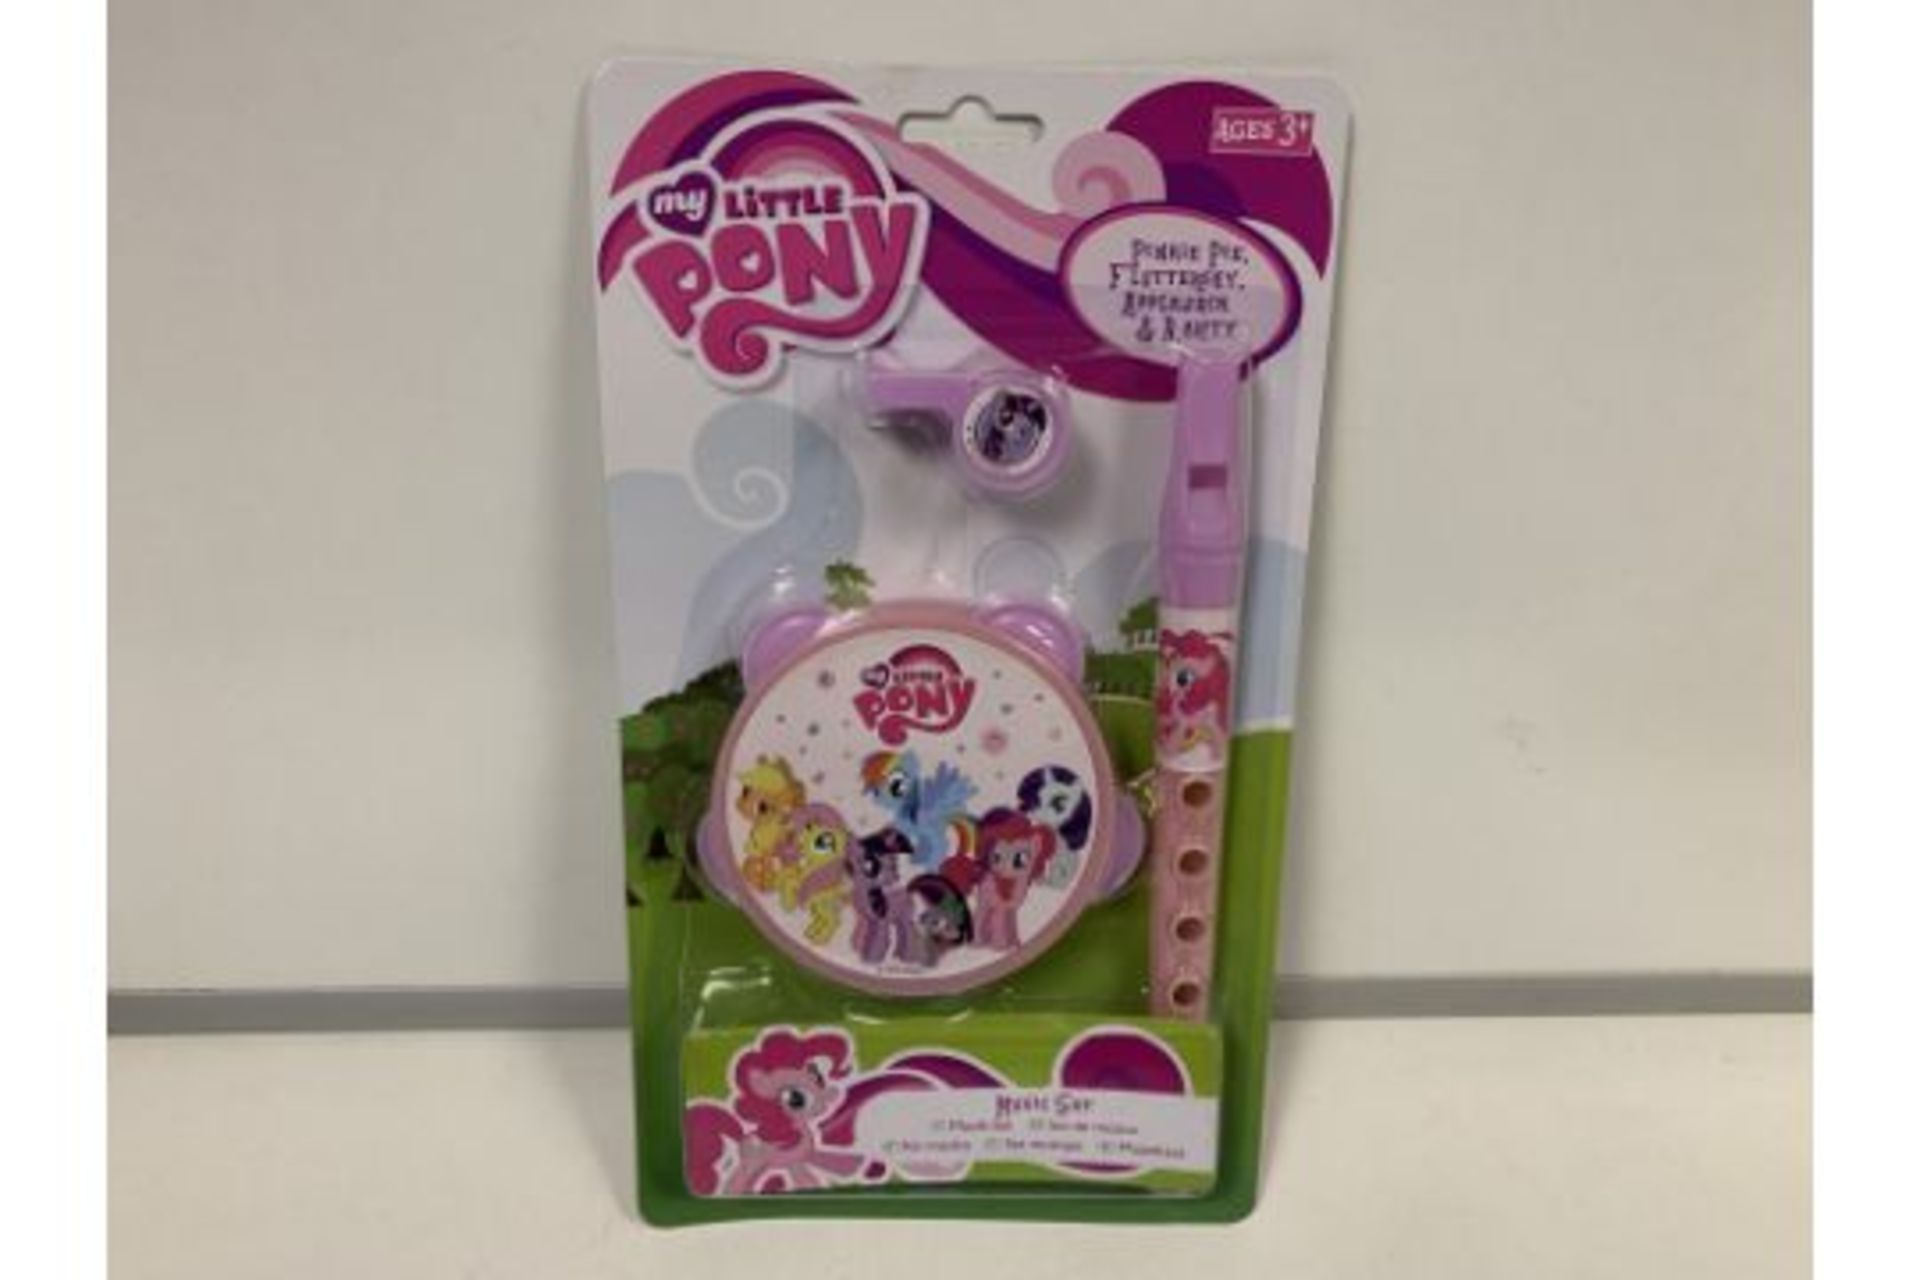 48 X MY LITTLE PONY 3 PIECE MUSIC SETS RRP £9.99 EACH